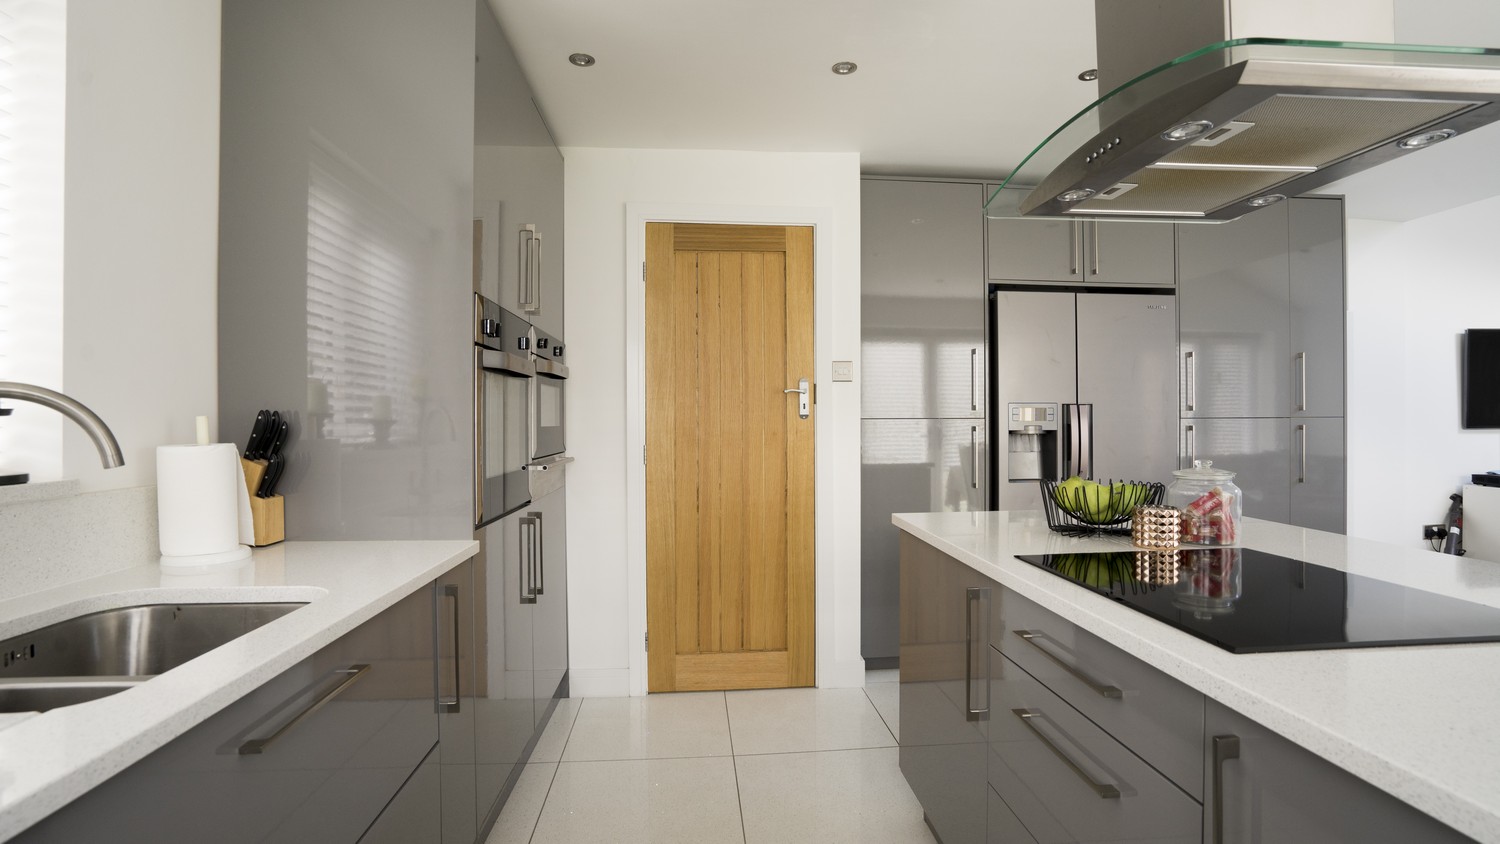 Taken from the far end of this space, this kitchen has been installed as part of a larger open plan living space.